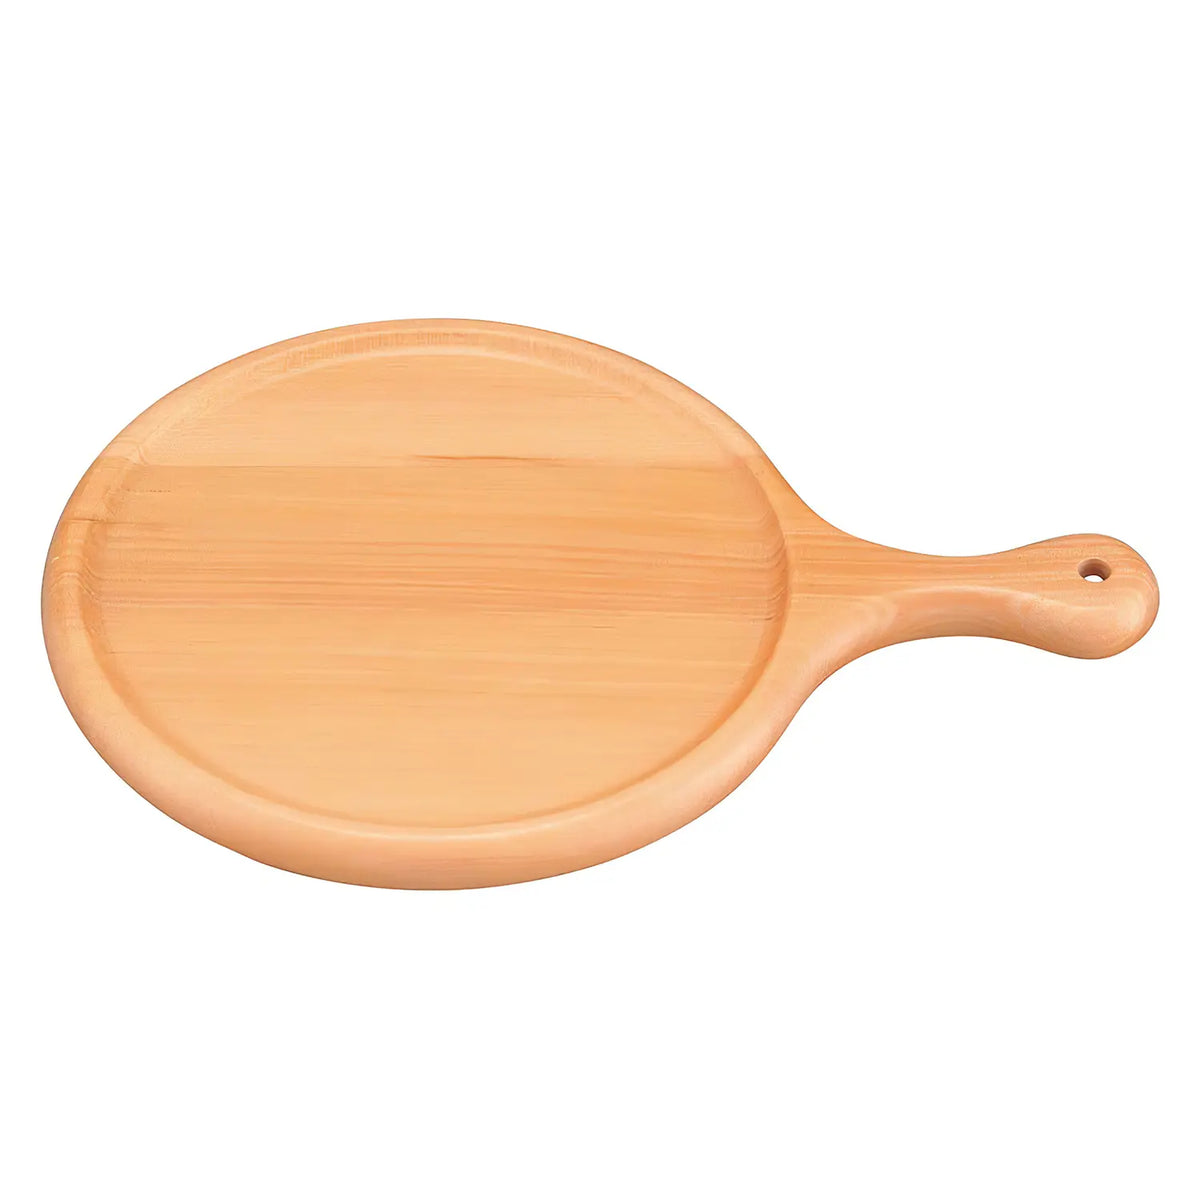 EBM Wooden Pizza Serving Tray